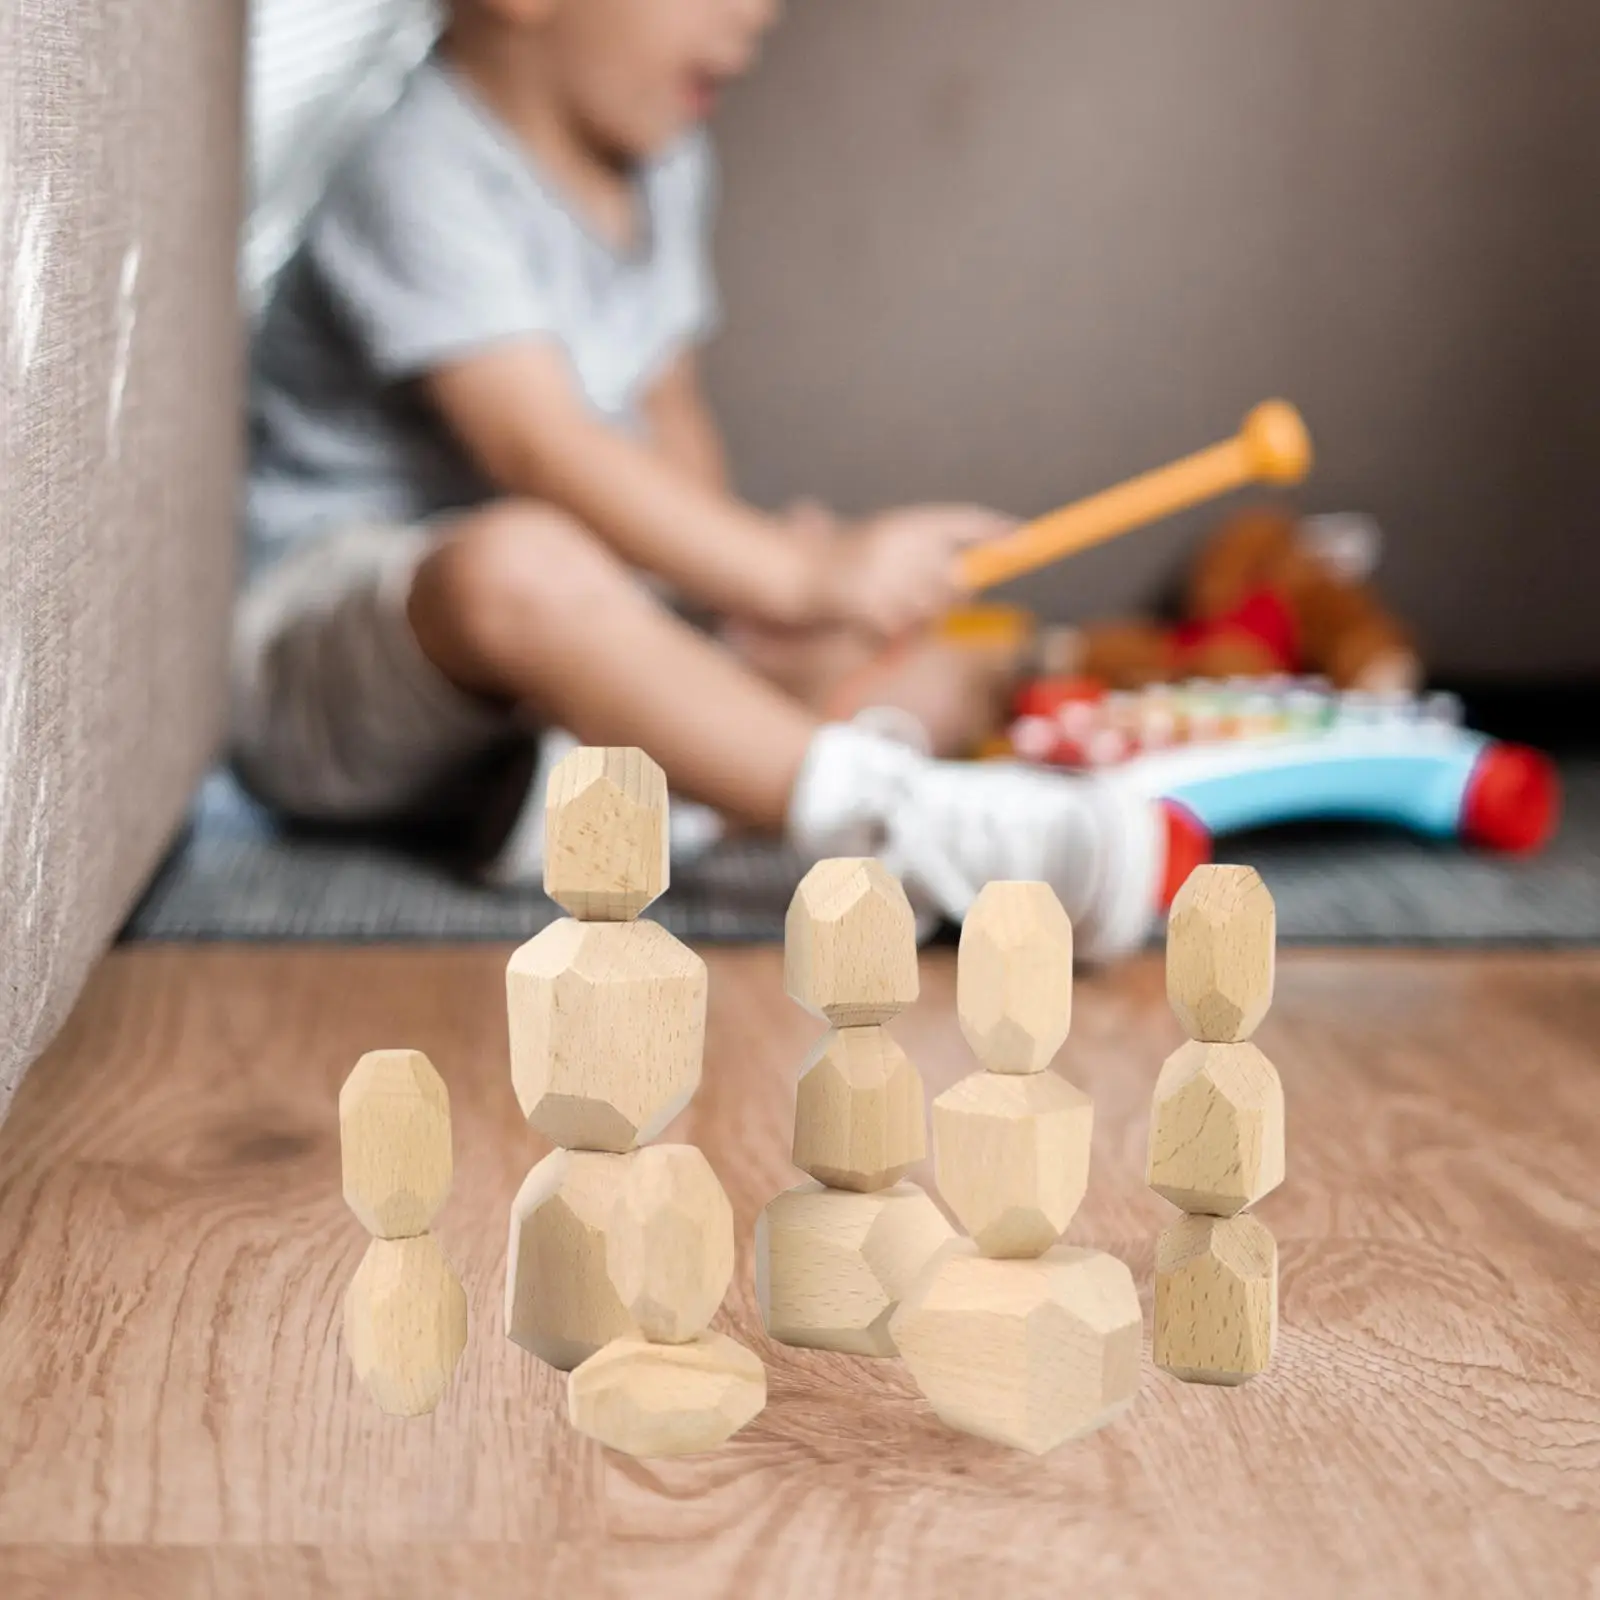 Wooden Balancing Stacking Stones Montessori Preschool Learning Lightweight Colorful Building Blocks Stacking Game for Children